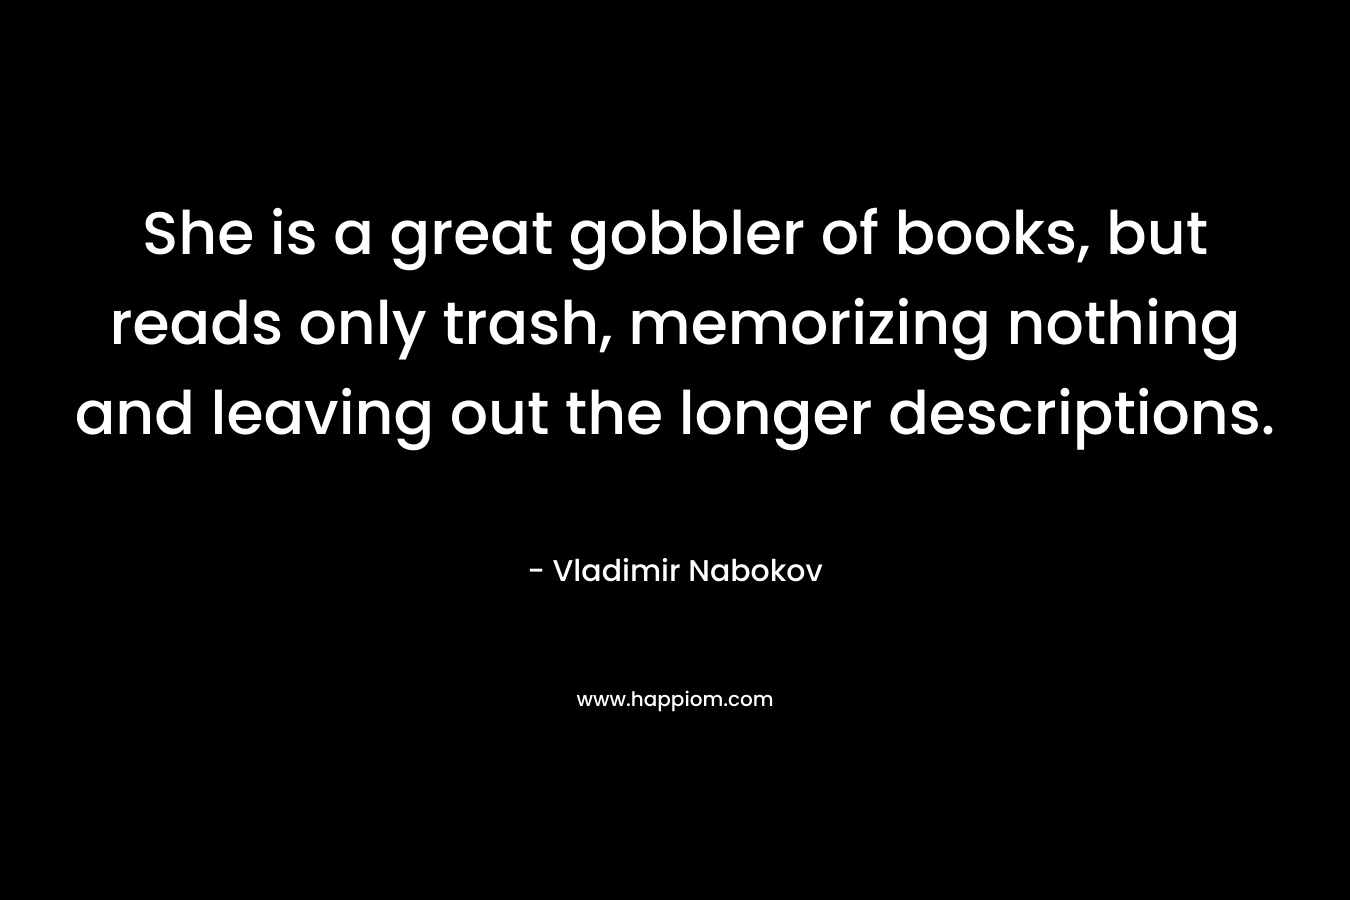 She is a great gobbler of books, but reads only trash, memorizing nothing and leaving out the longer descriptions.